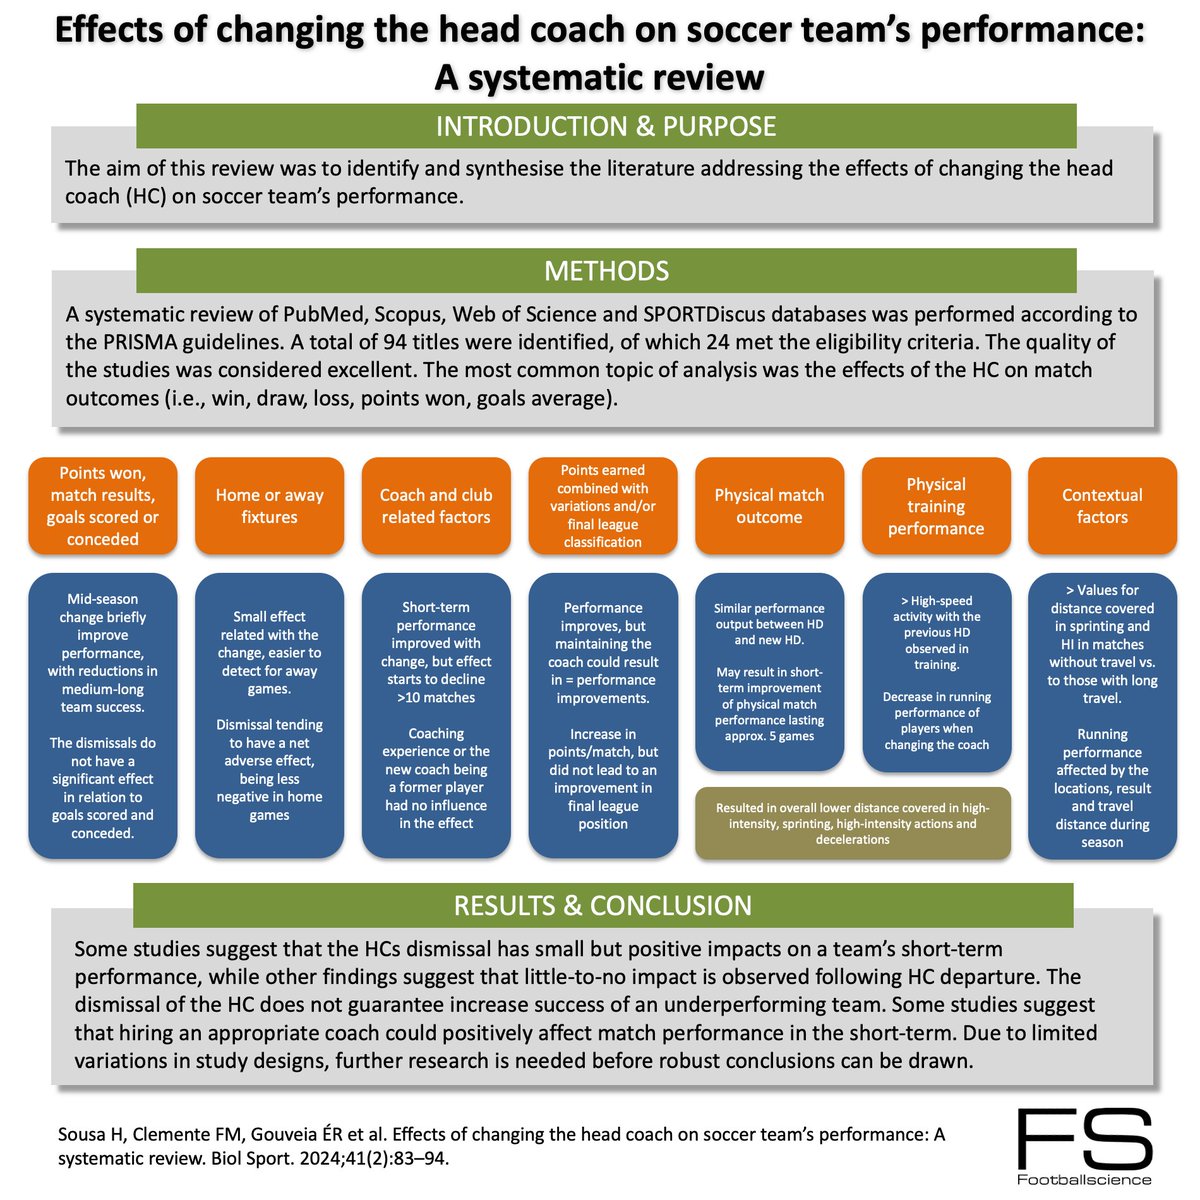 Effects of changing the head coach @Clemente_FM #footballscience #footballresearch